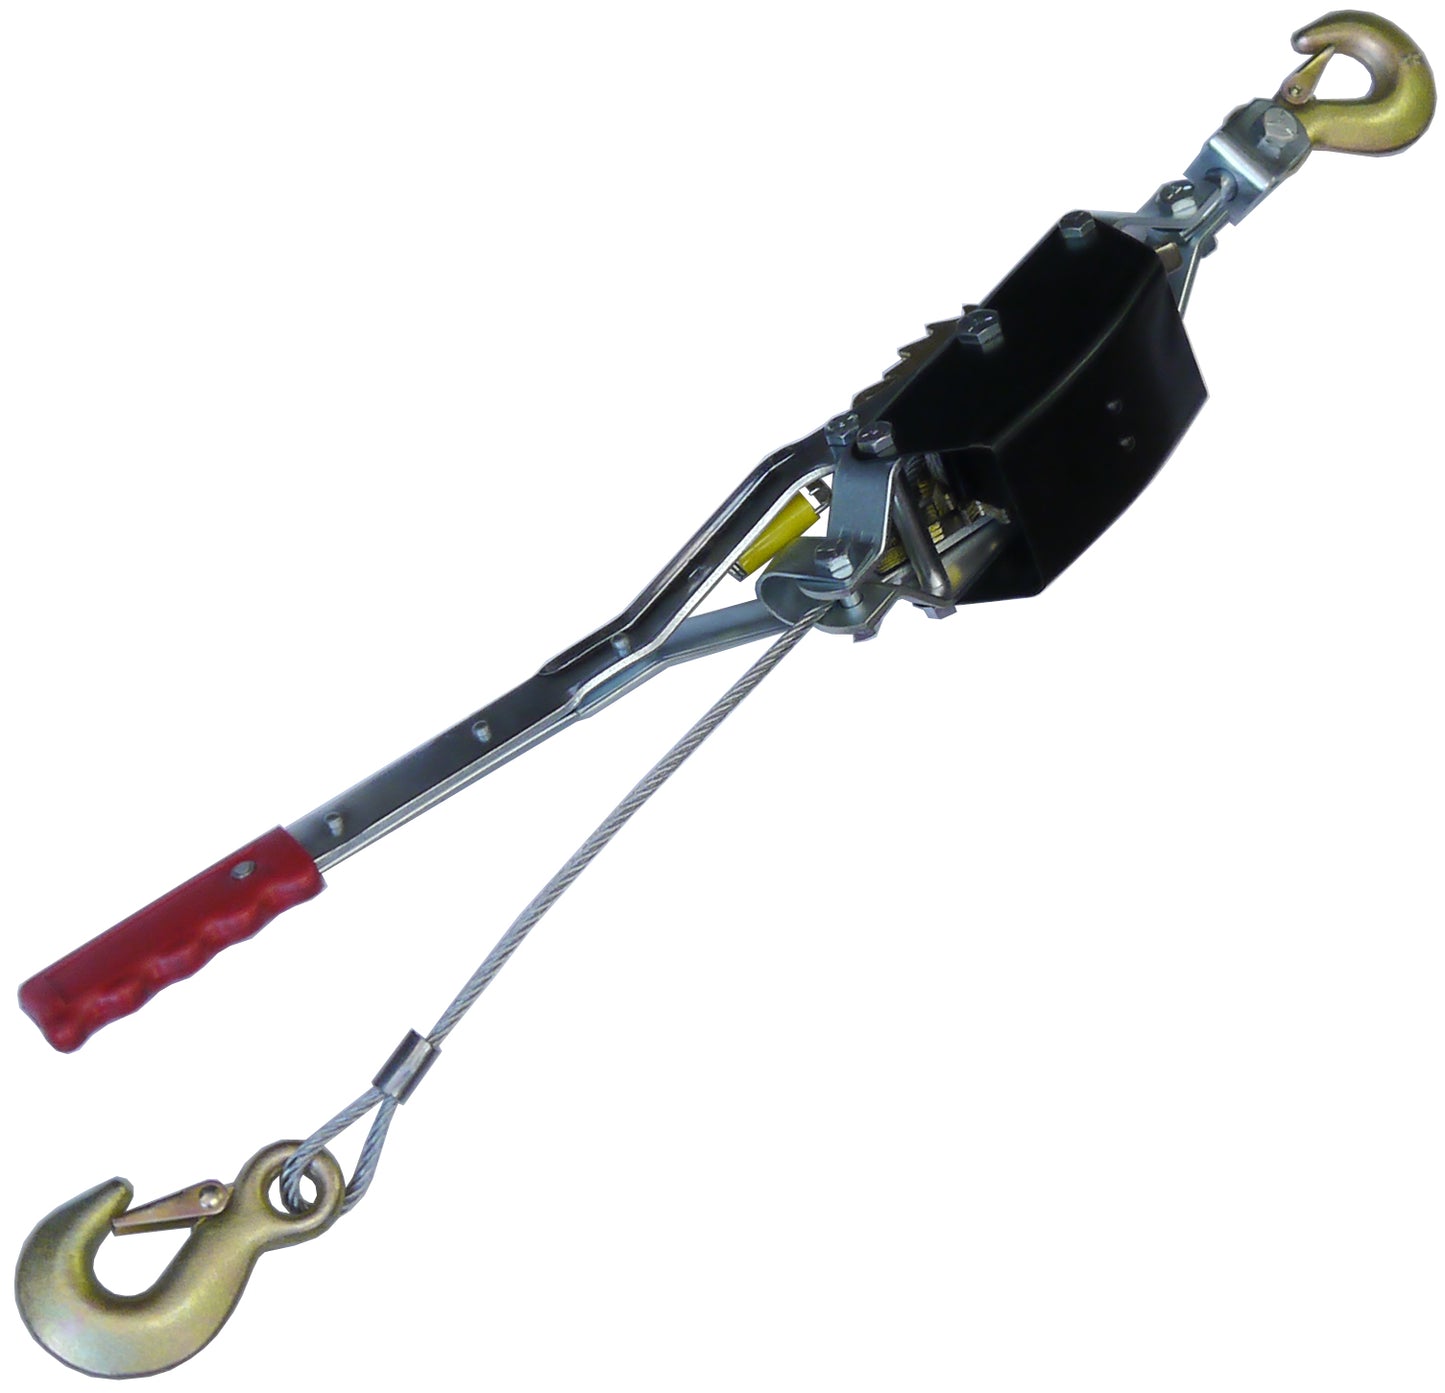 Cable Puller - 1/2 Ton Lift - 1 Ton Pull (6312035)